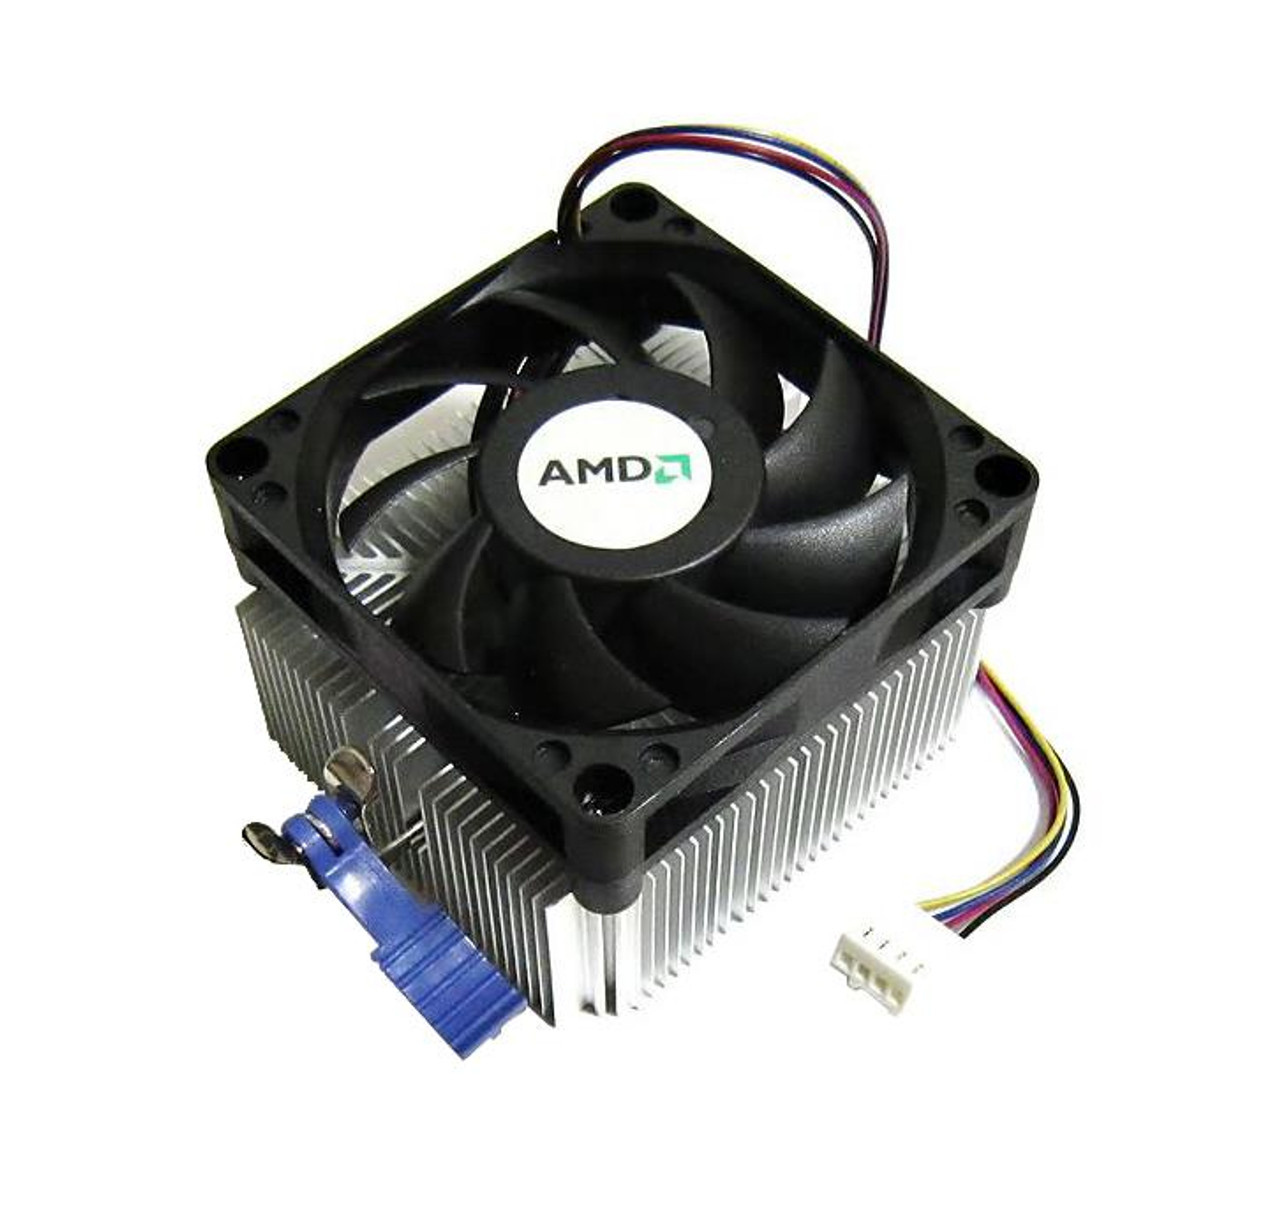 HSACFPII Memory Upgrades Heat Sink/Cooling Fan use for Intel PII SECC Slot 1 and AMD Slot A